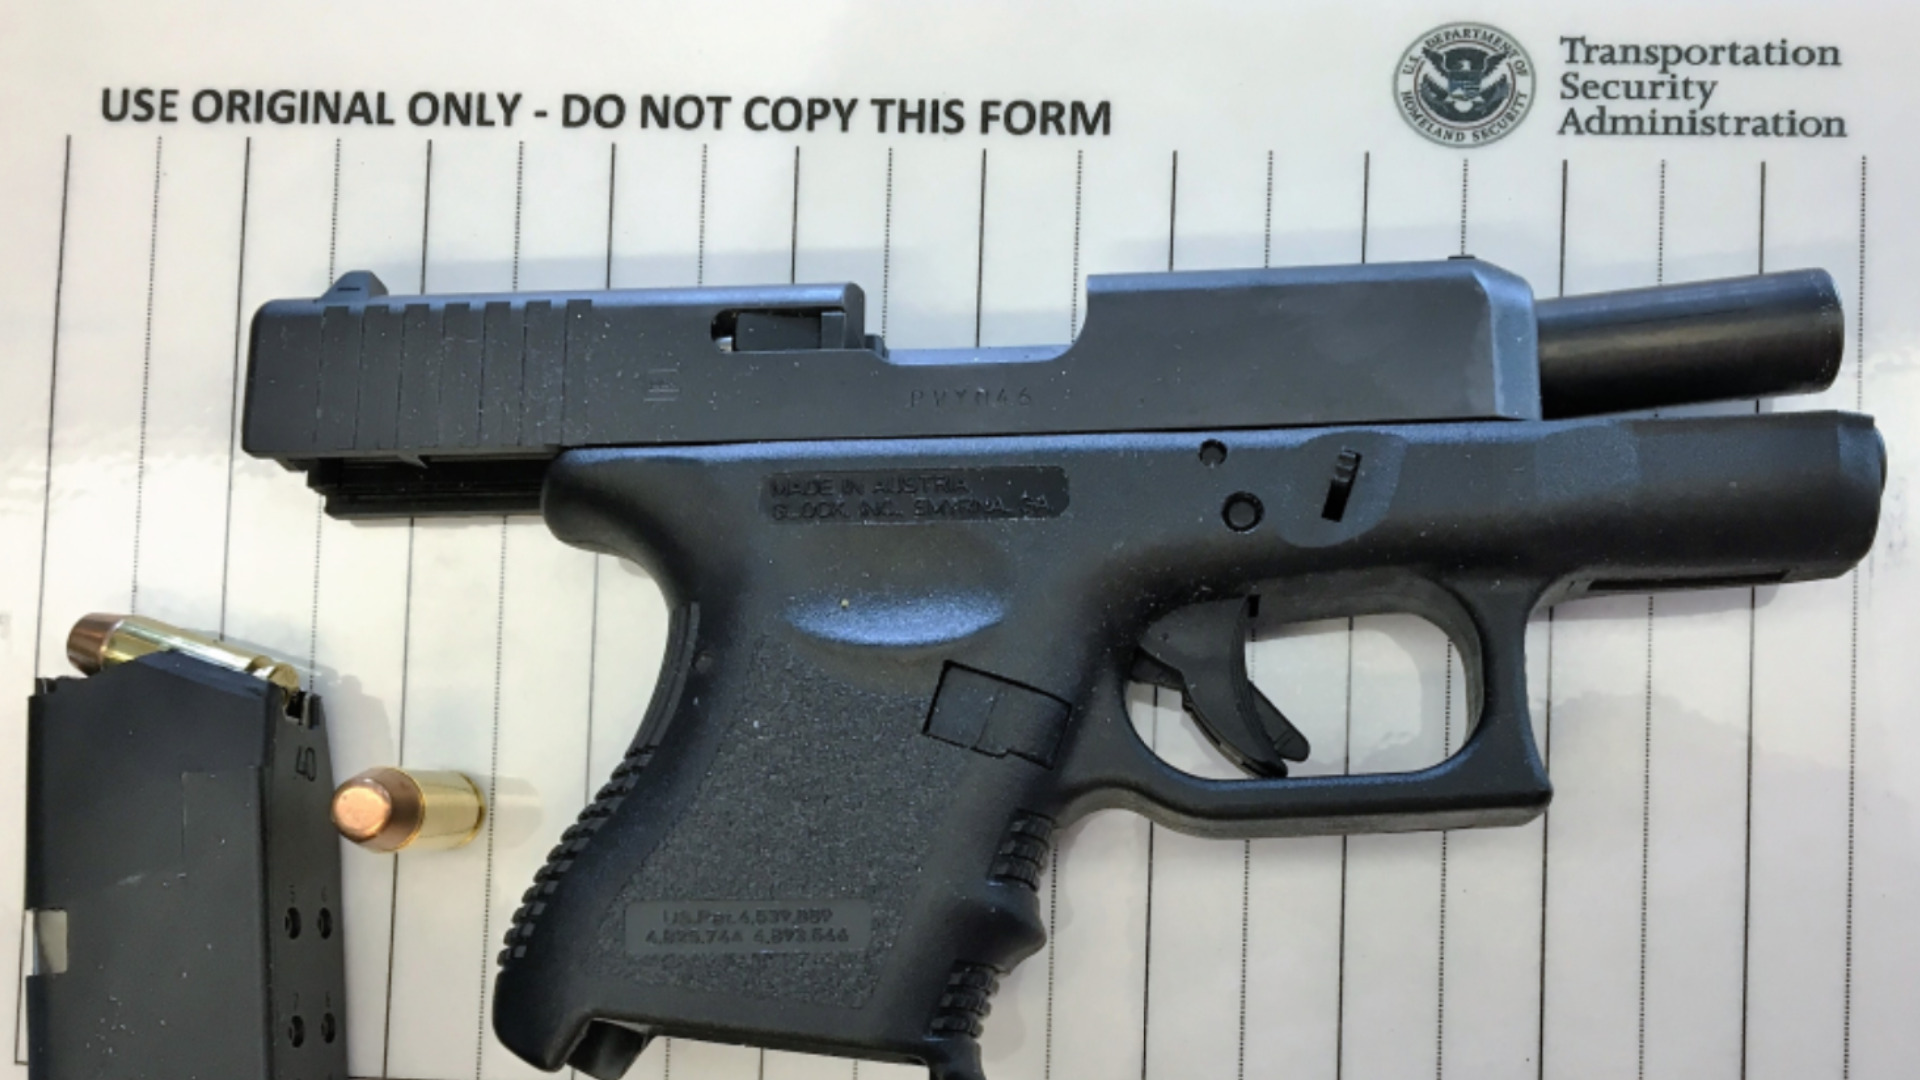 TSA officers confiscated a record number of guns at airport checkpoints in 2022, agency officials announced Tuesday.